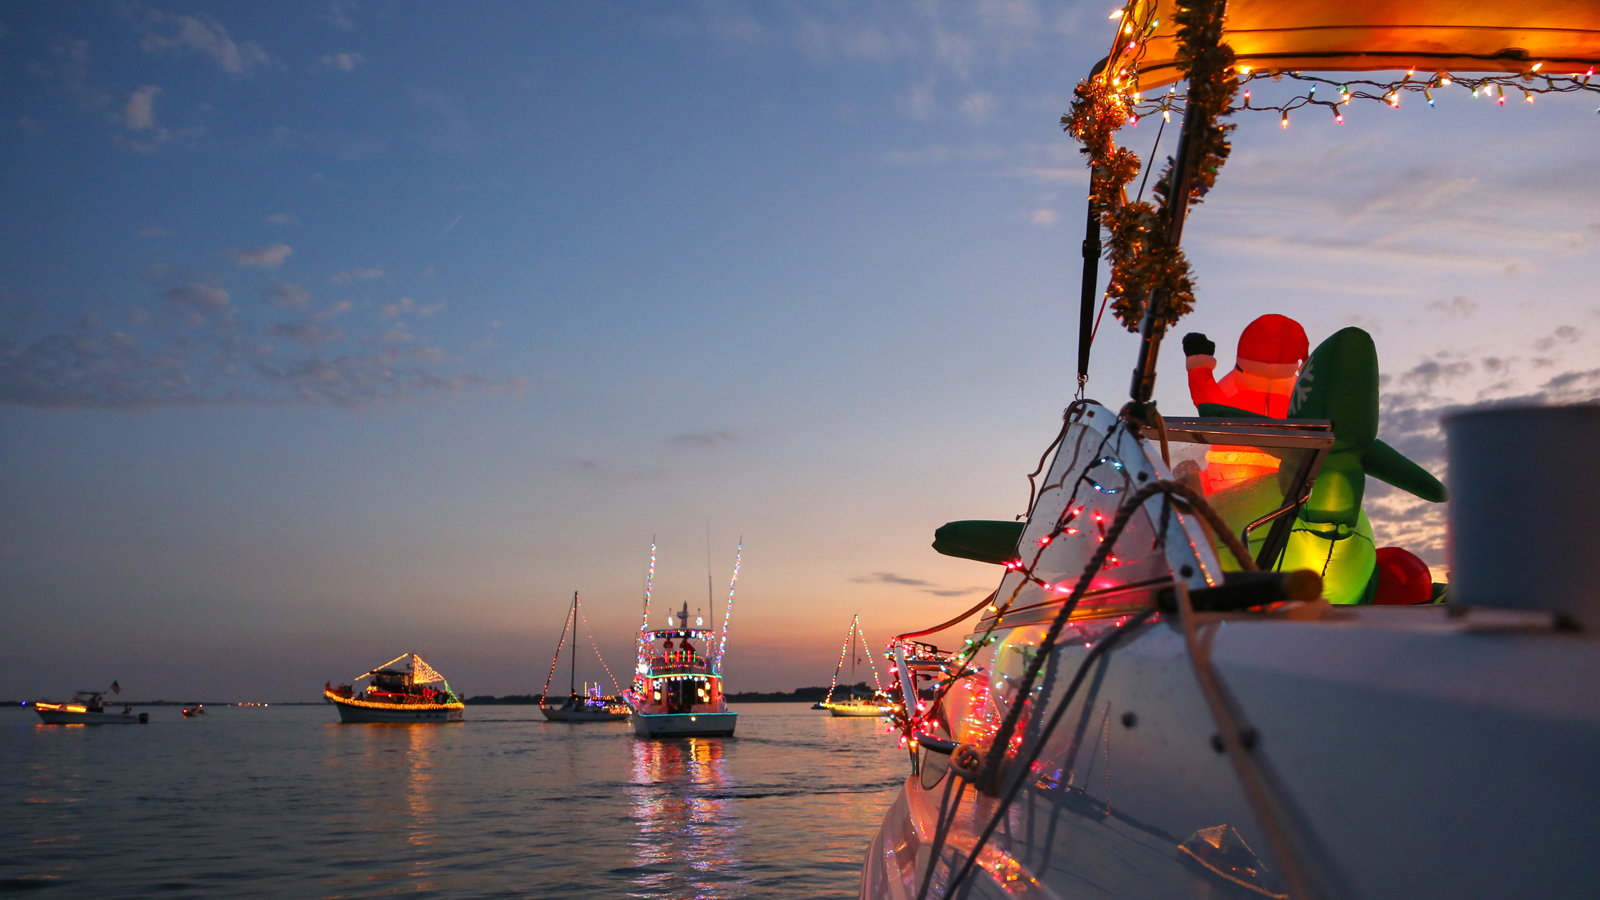 Key West In December - Lighted Boat Parade At Historic Seaport